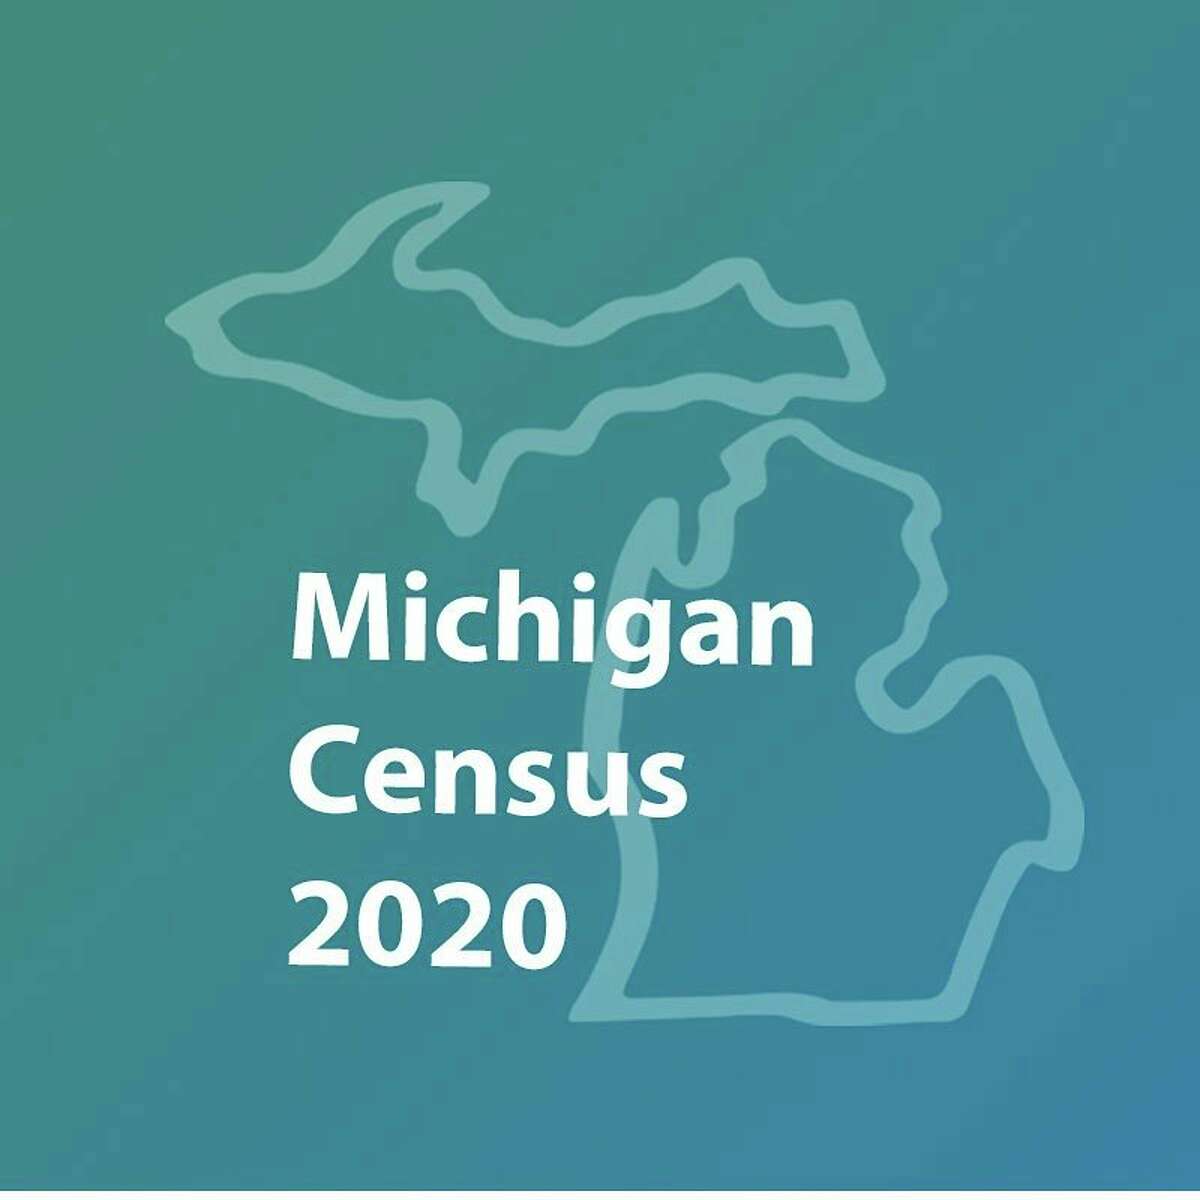 Census takers are now visiting homes to help residents respond to the 2020 census. The deadline for responding has been moved up to Sept. 30. (Photo courtesy of 2020 Census/michigan.gov)